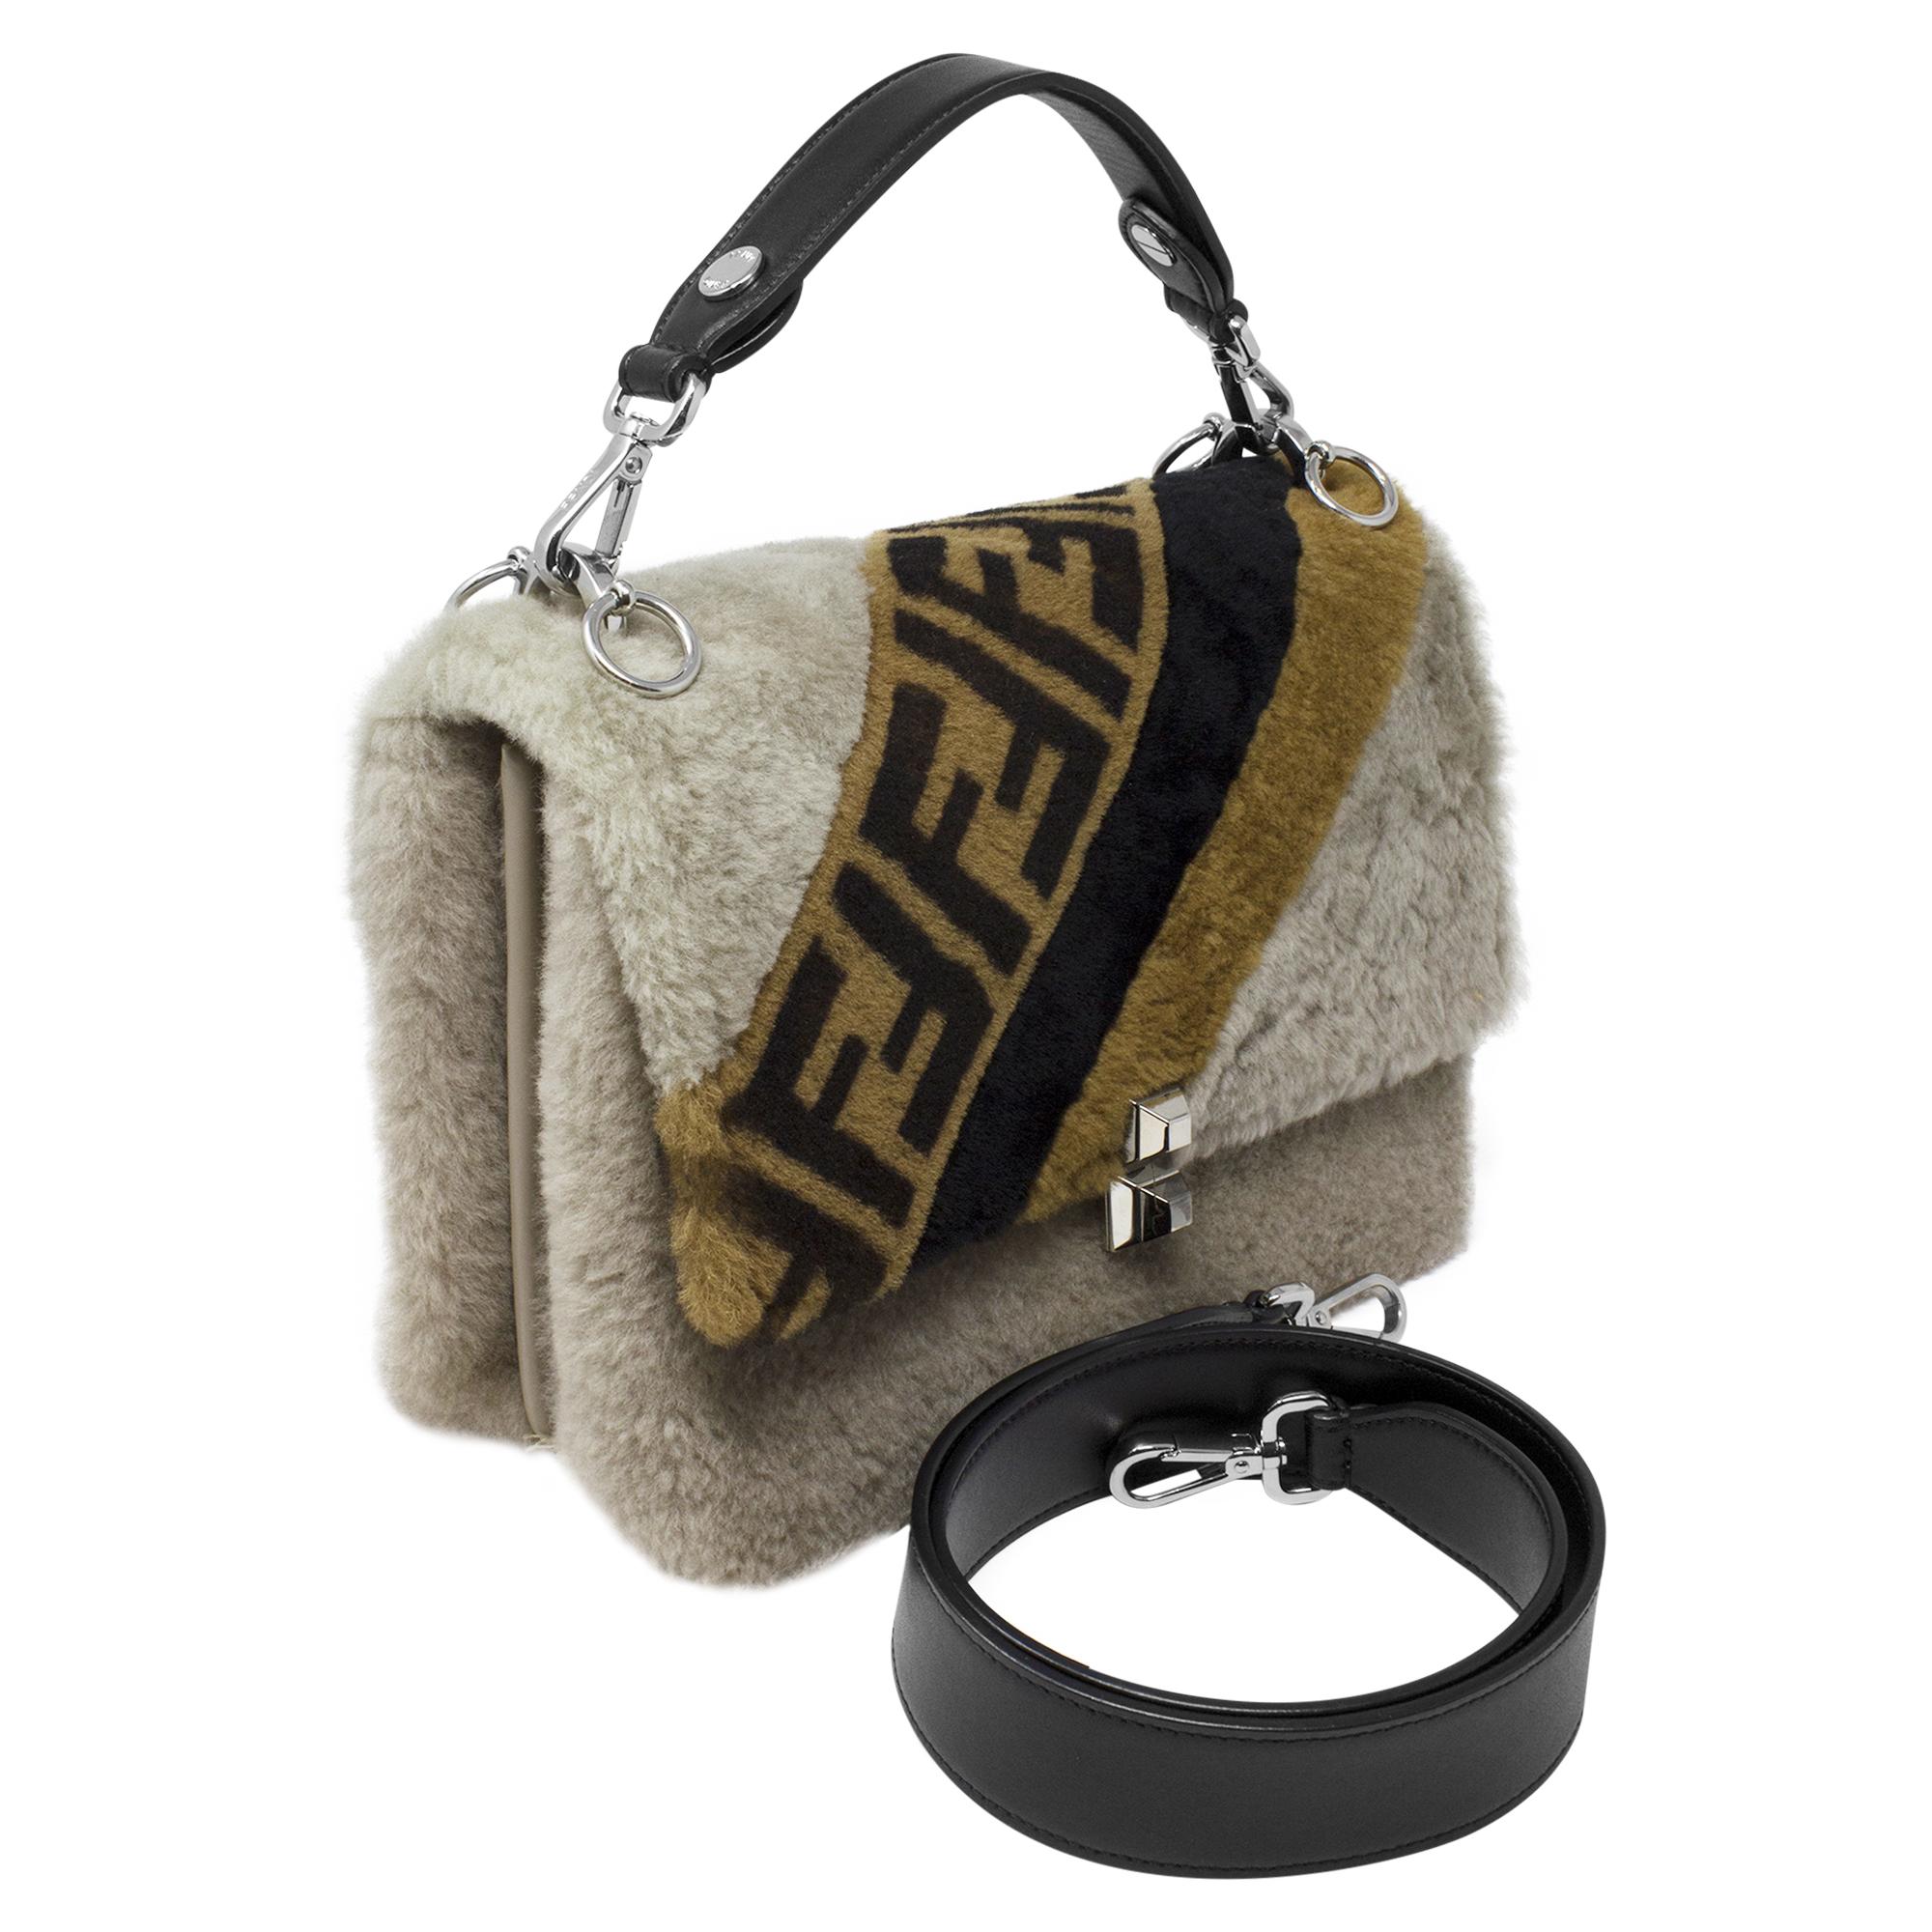 Introducing the Fendi Limited Edition Shearling Zucca Flap Bag, a luxurious statement piece for the fashion connoisseur. Crafted from sumptuous beige shearling fur, this bag exudes opulence and elegance. Adorned with Fendi's iconic Zucca print, it's